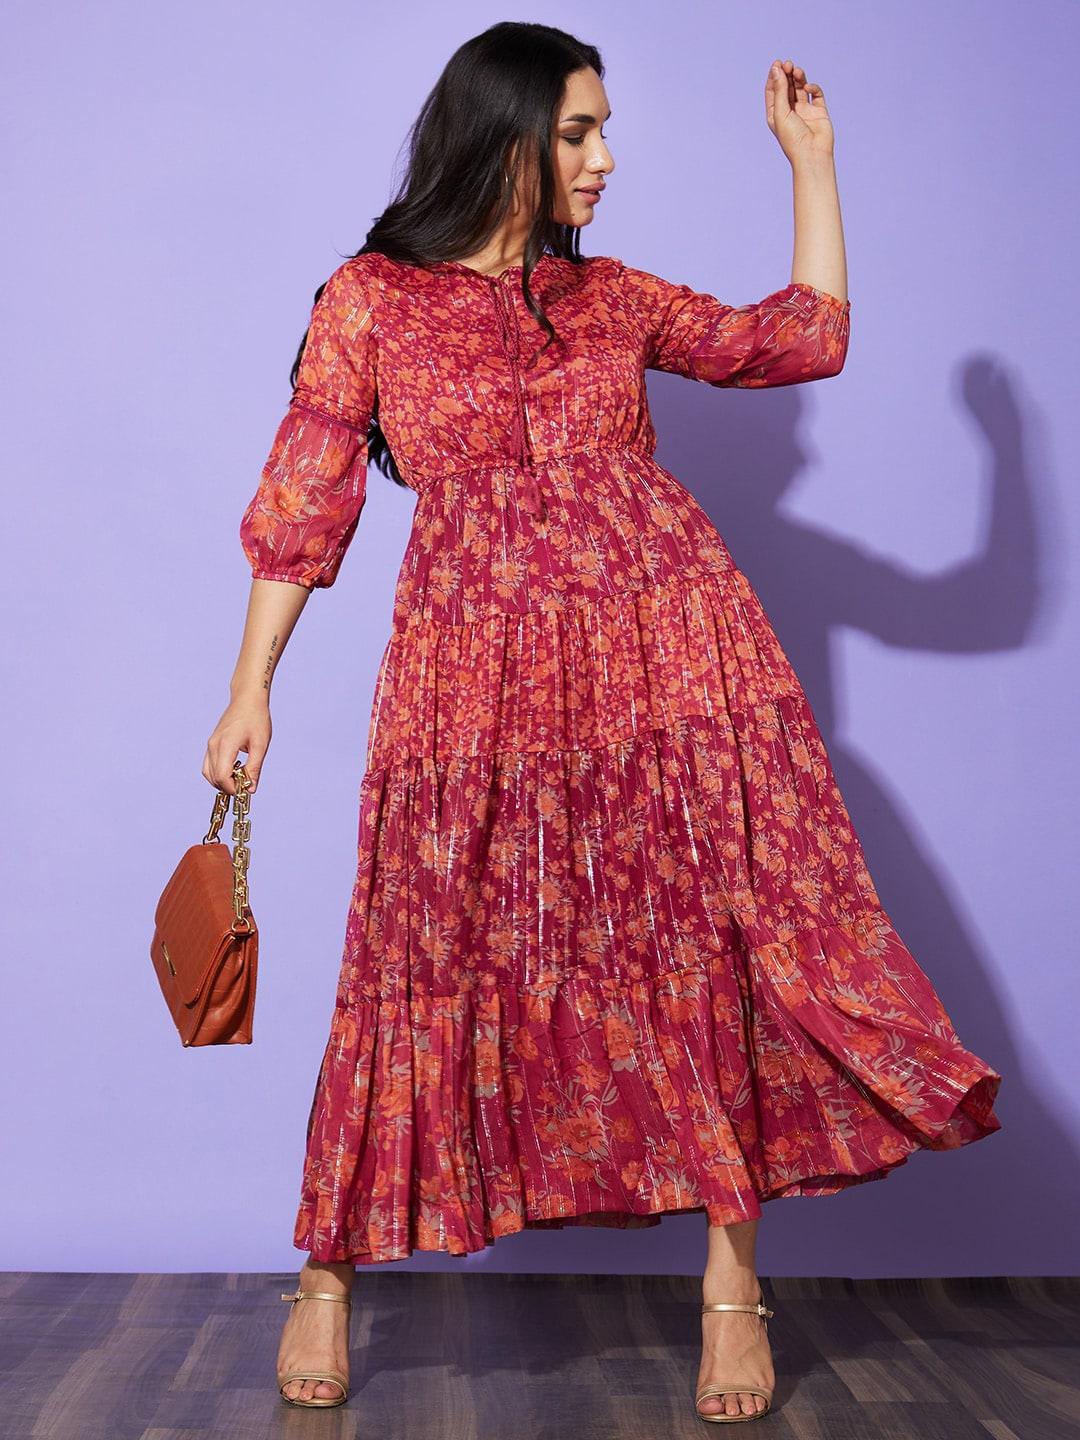 globus pink floral printed tie-up neck maxi ethnic dress